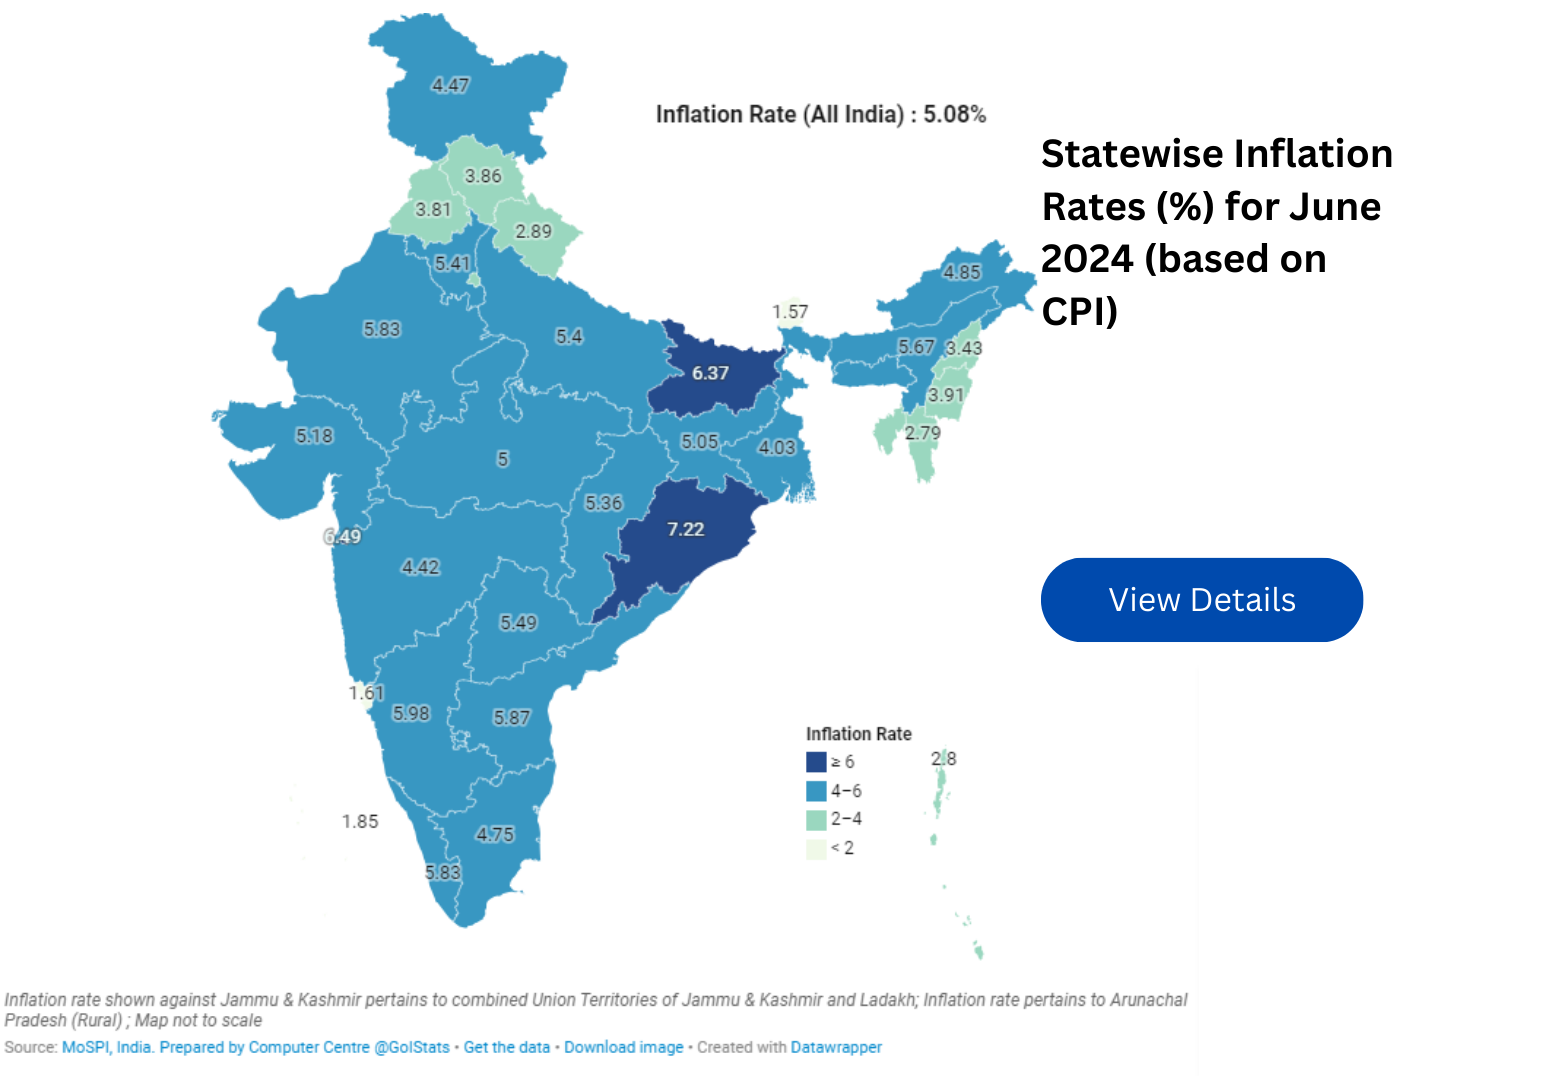 Statewise Inflation Rates